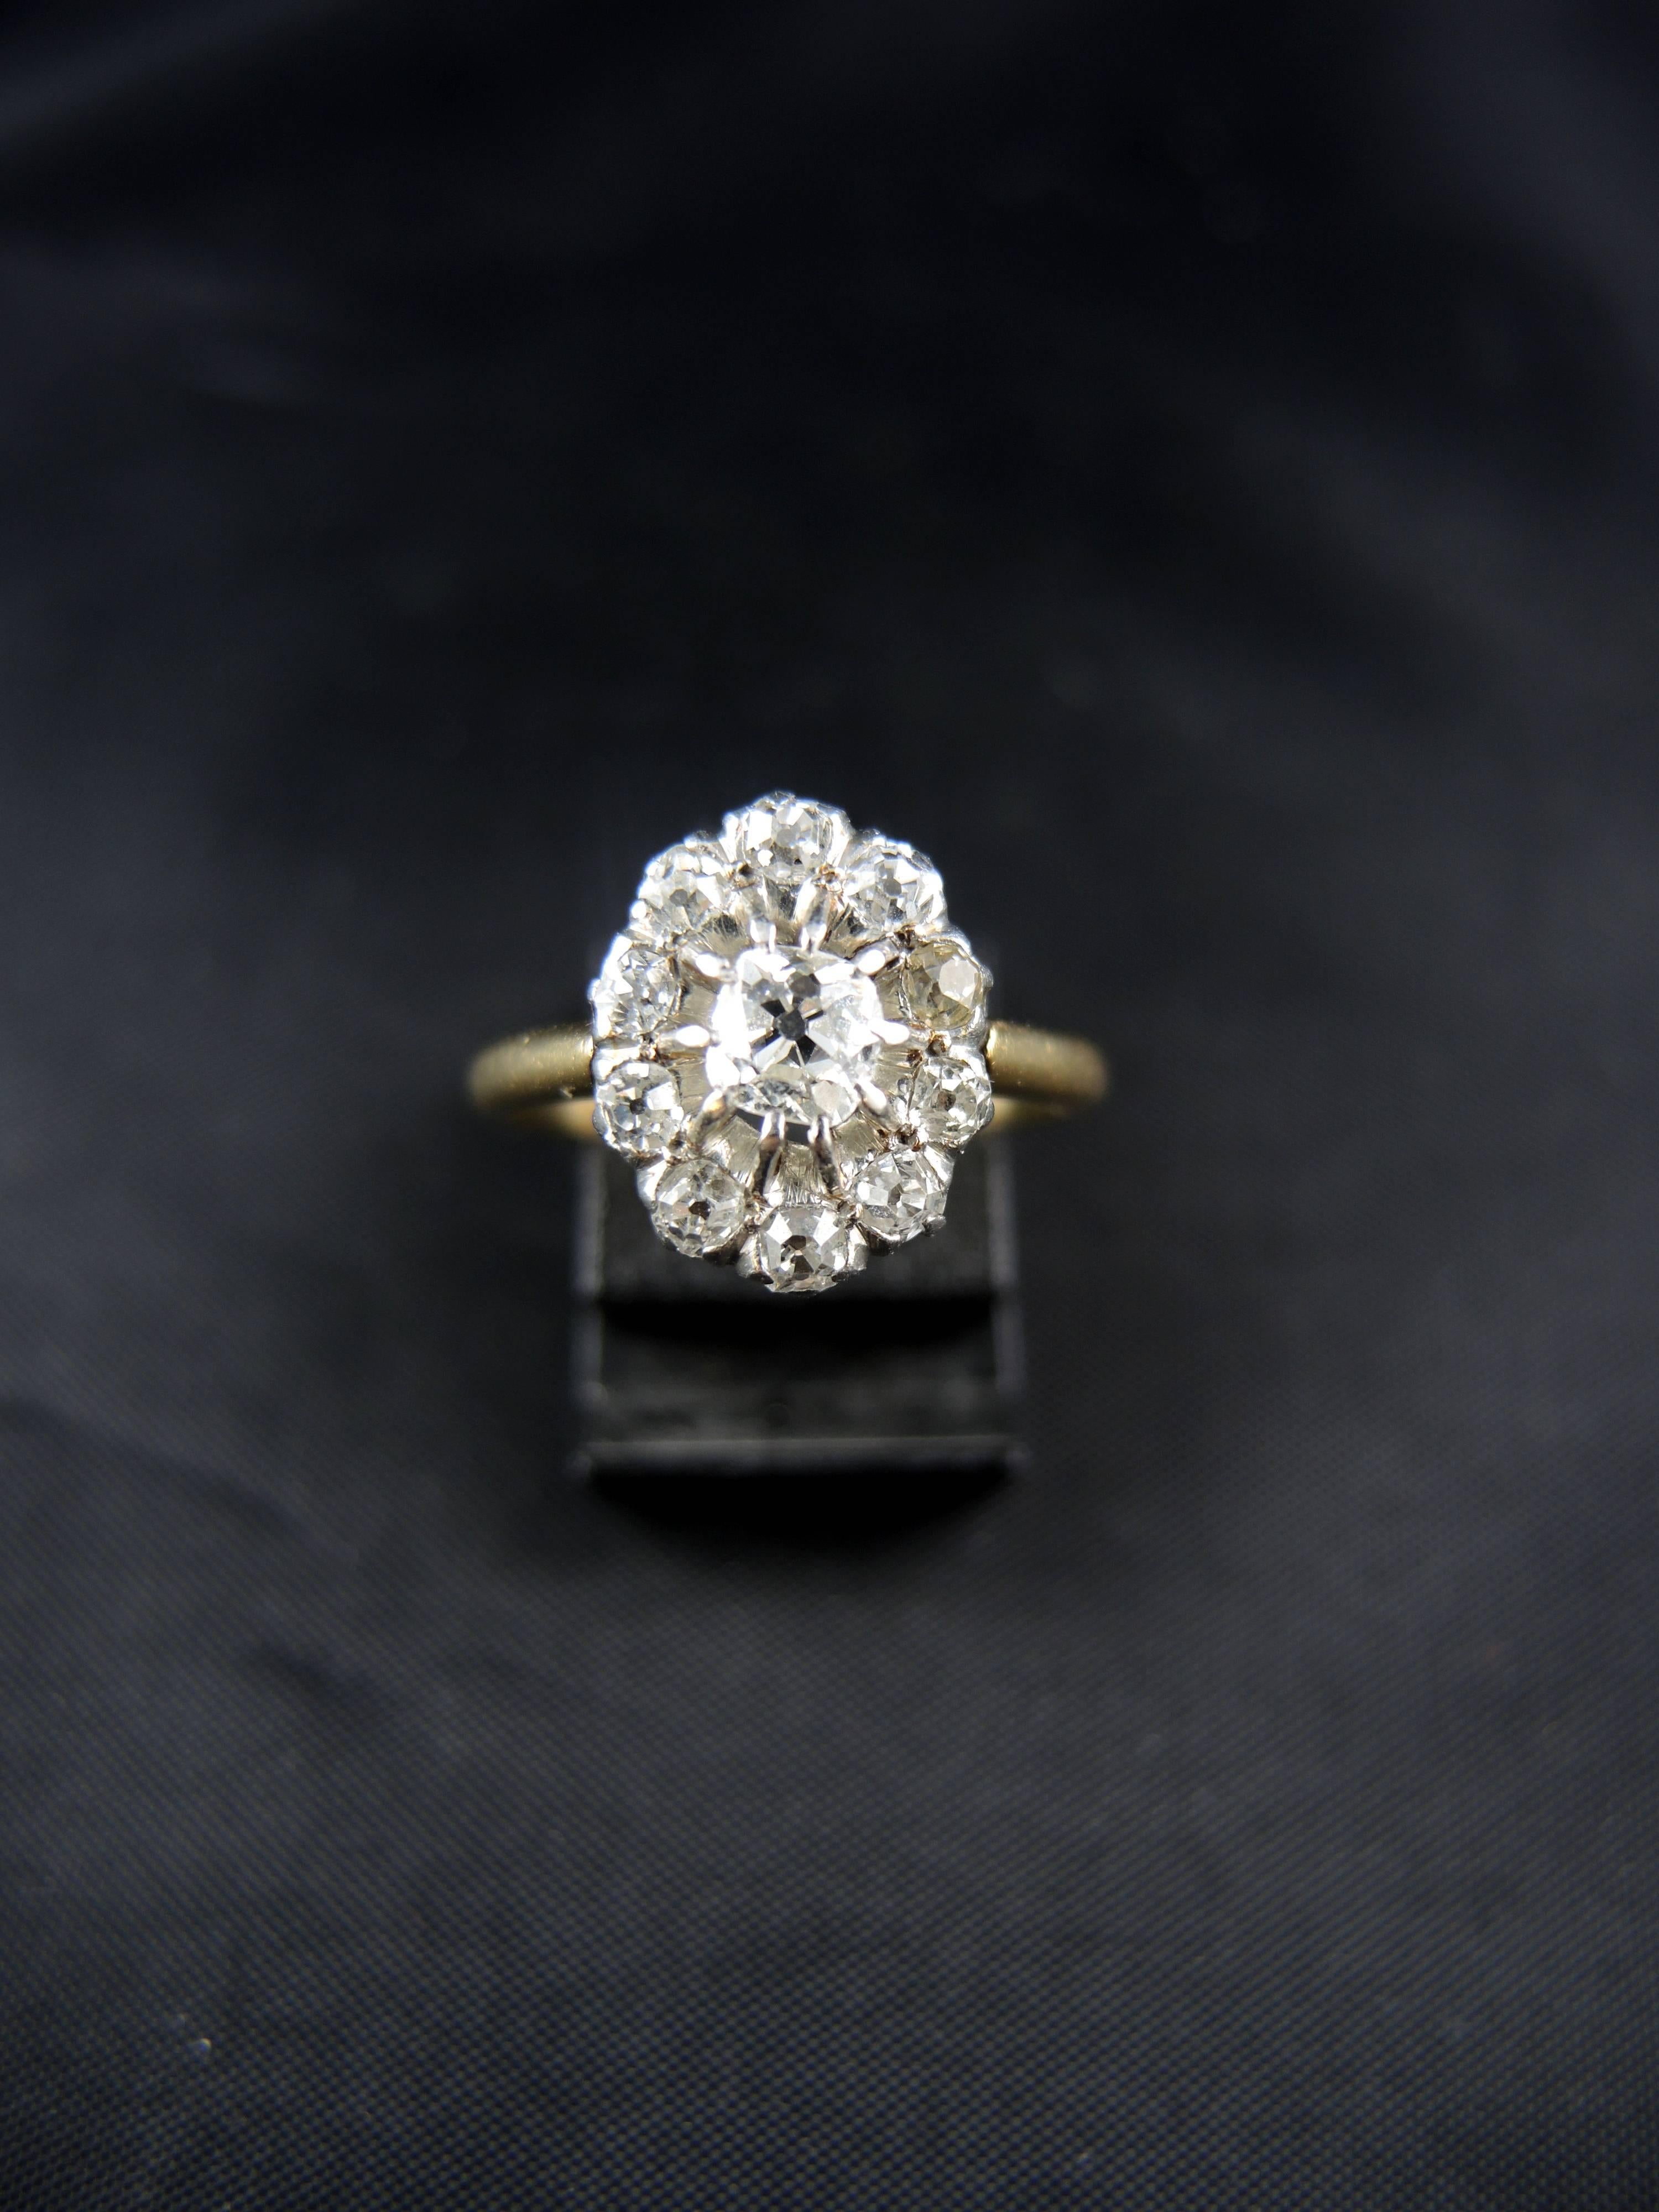 18kt gold and platinium engagment ring (hallmarks: owl and Mascaron) set with old mine cut diamonds (total weight apx 1,20 Ct)

Circa 1900. 

Weight: 4,20g 
Ring size: 55 (diameter 17,50/ US size 7,25). 
Hight of the central pattern: 1,30 cm

State